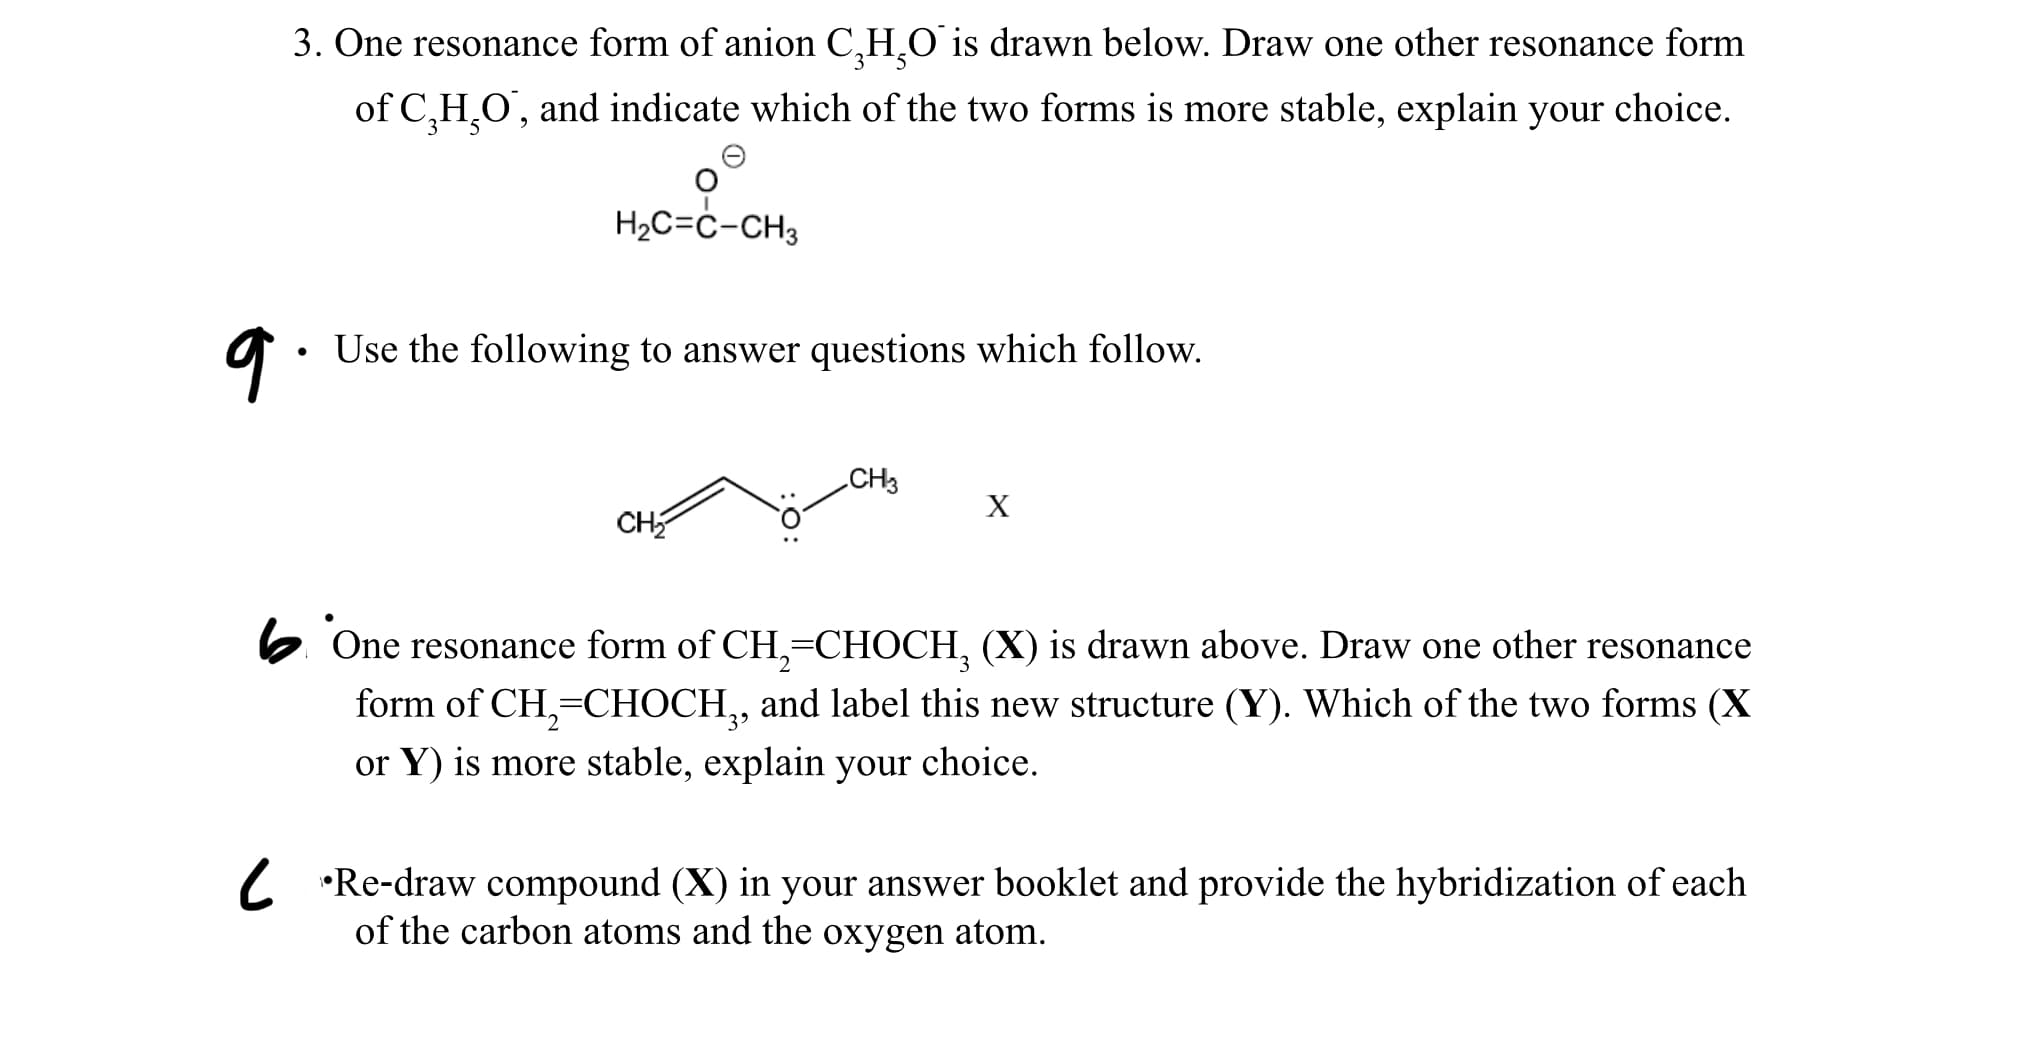 3. One resonance form of anion C,H¸O is drawn below. Draw one other resonance form
of C,H,O', and indicate which of the two forms is more stable, explain your choice.
H2C=ċ-CH3
